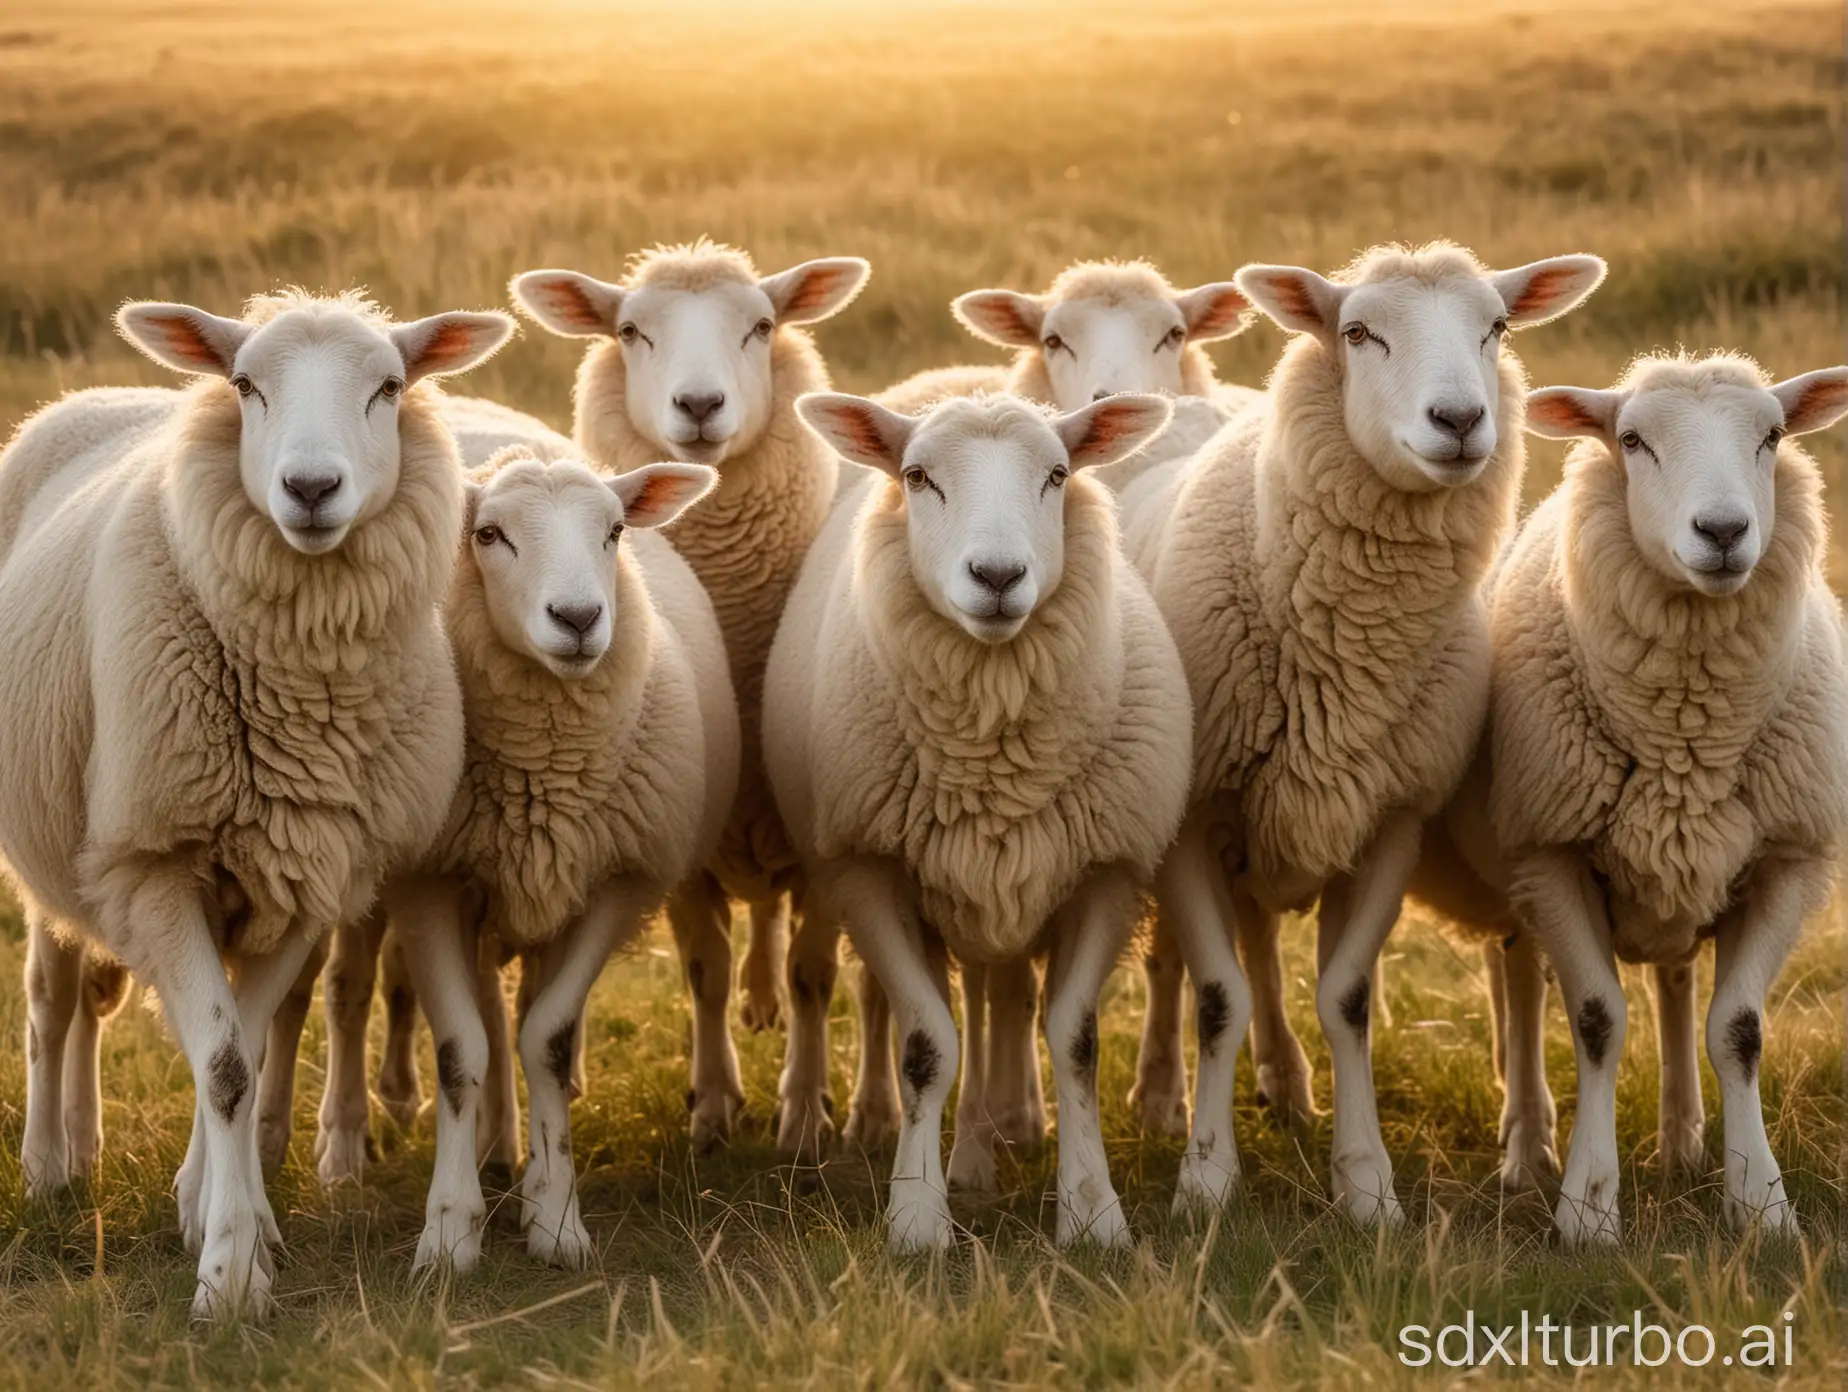 The image shows a close-up of a group of eight sheep in a grassy field during golden hour, with the soft, warm light of the sun illuminating their faces and wool. The eight sheep come in a variety of colors, including white and brown, with distinctive black faces and ears on some. They are directly facing the camera, providing a symmetrical and captivating composition. The background features a dry location with rolling dunes with a play of light and shadow, creating a sense of depth and a peaceful atmosphere. The overall atmosphere is calm and idyllic, highlighting the natural beauty of the animals in their environment